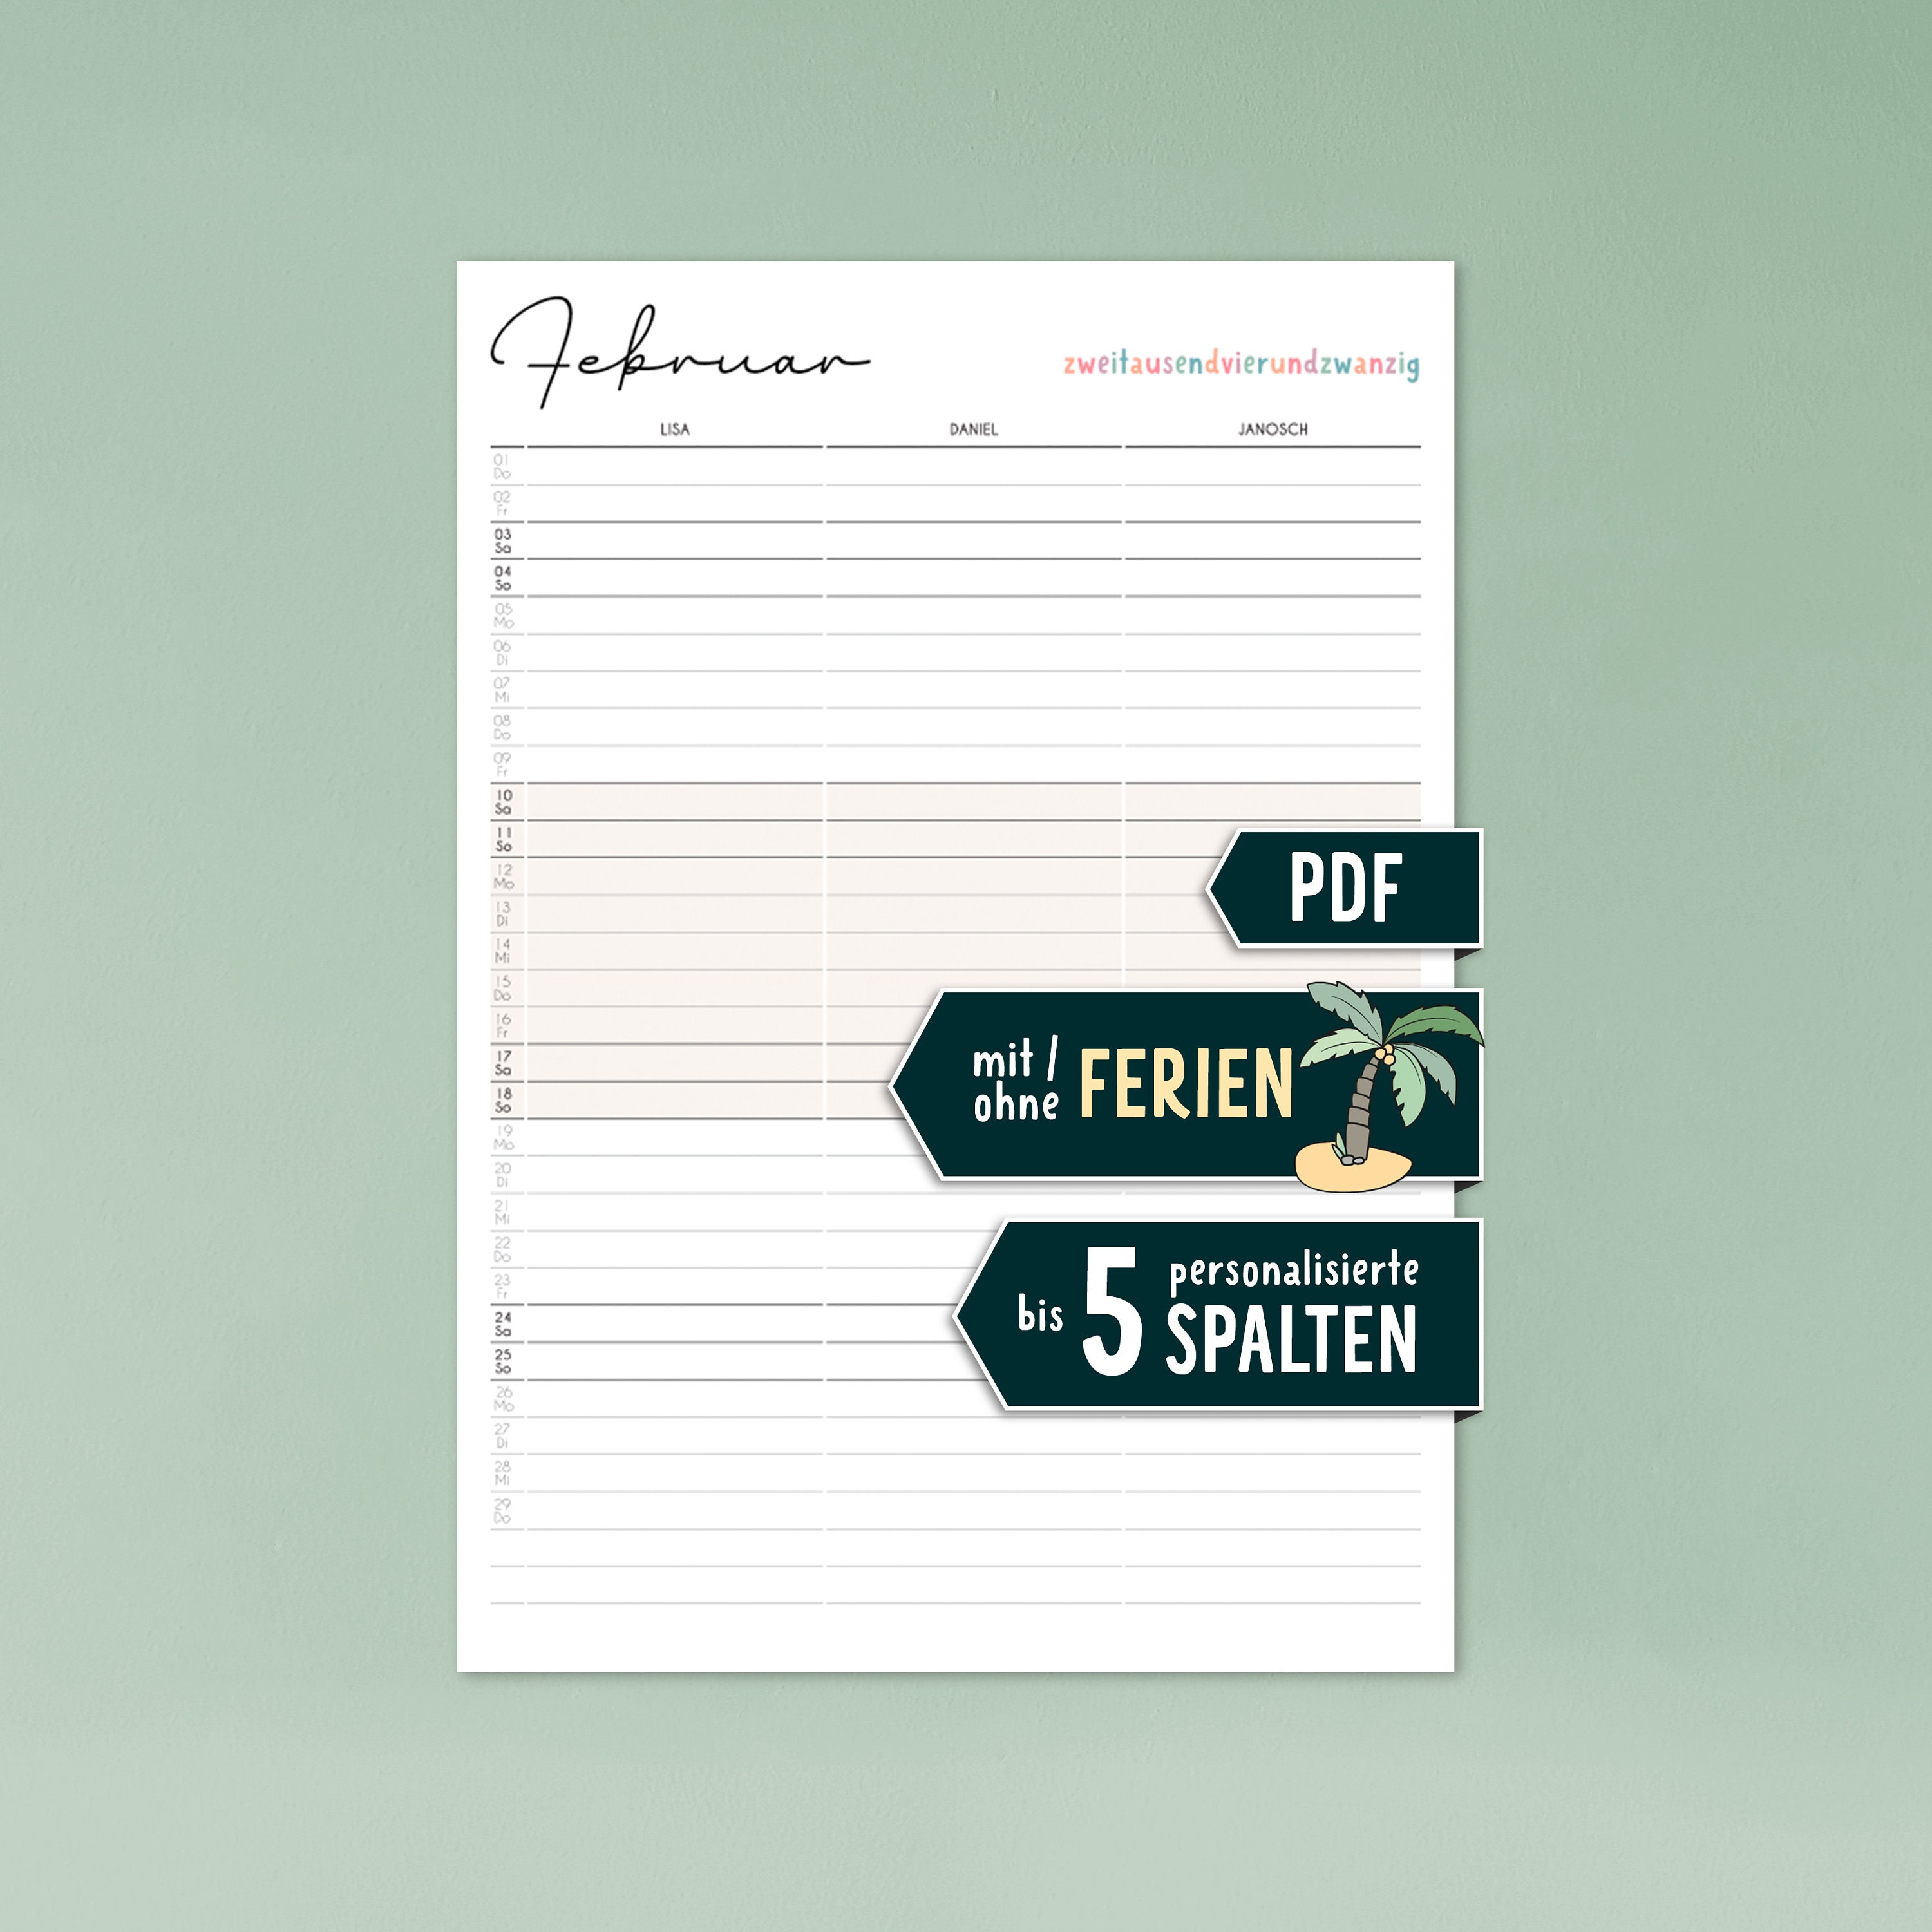 PRINTABLE Set of 3 Double Column Lined Paper 11x17 Pages Wide